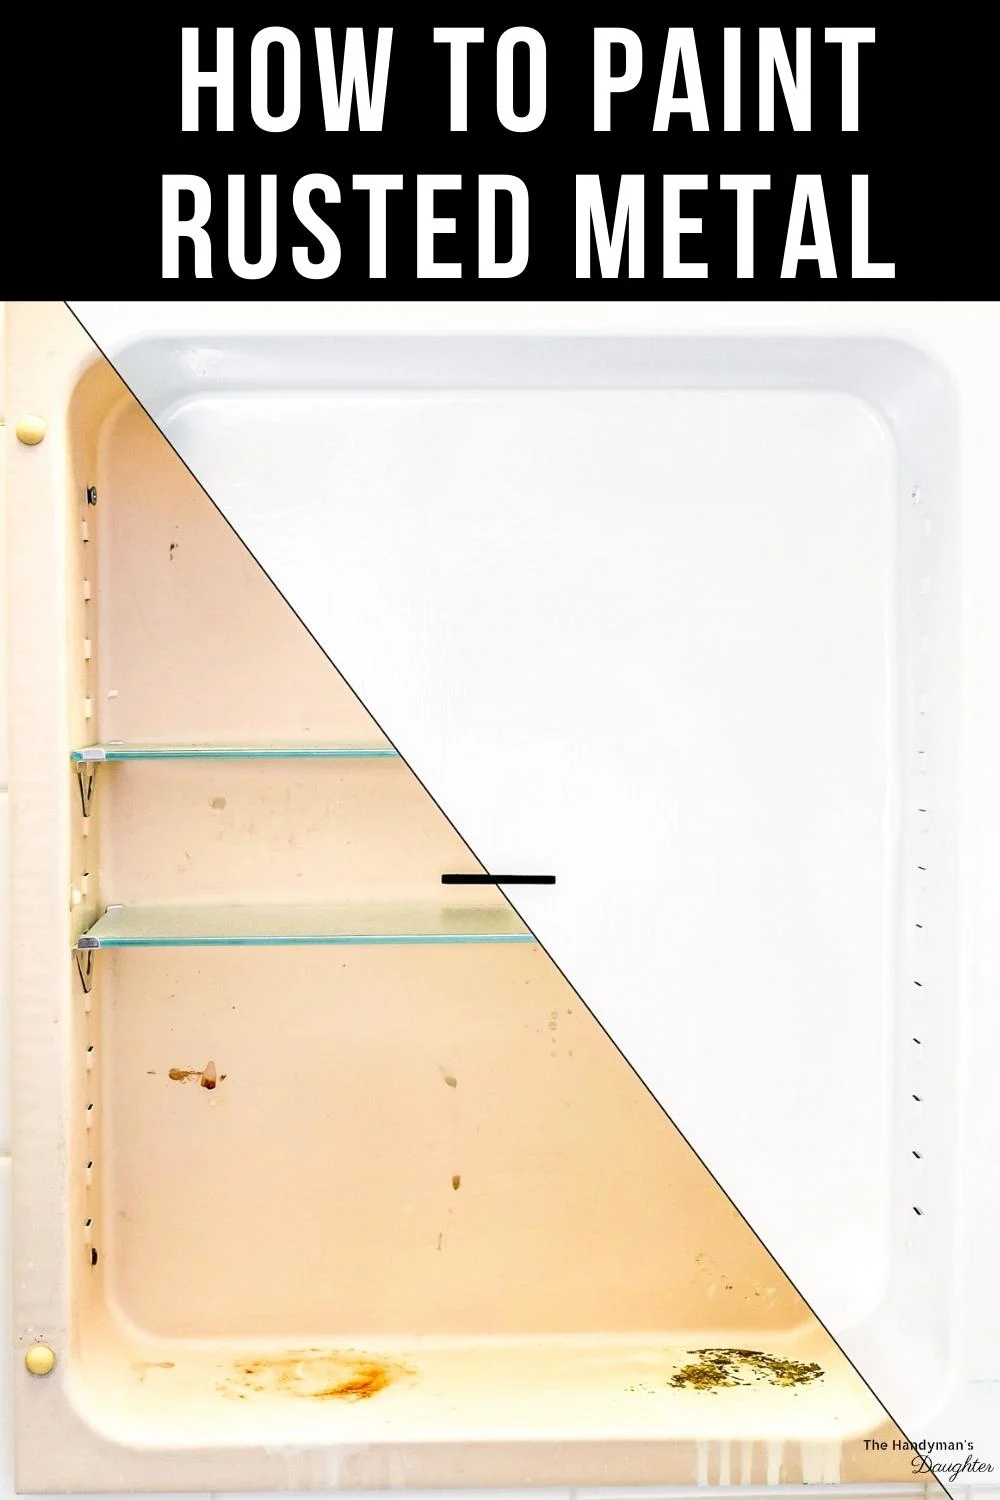 How to Paint Rusted Metal